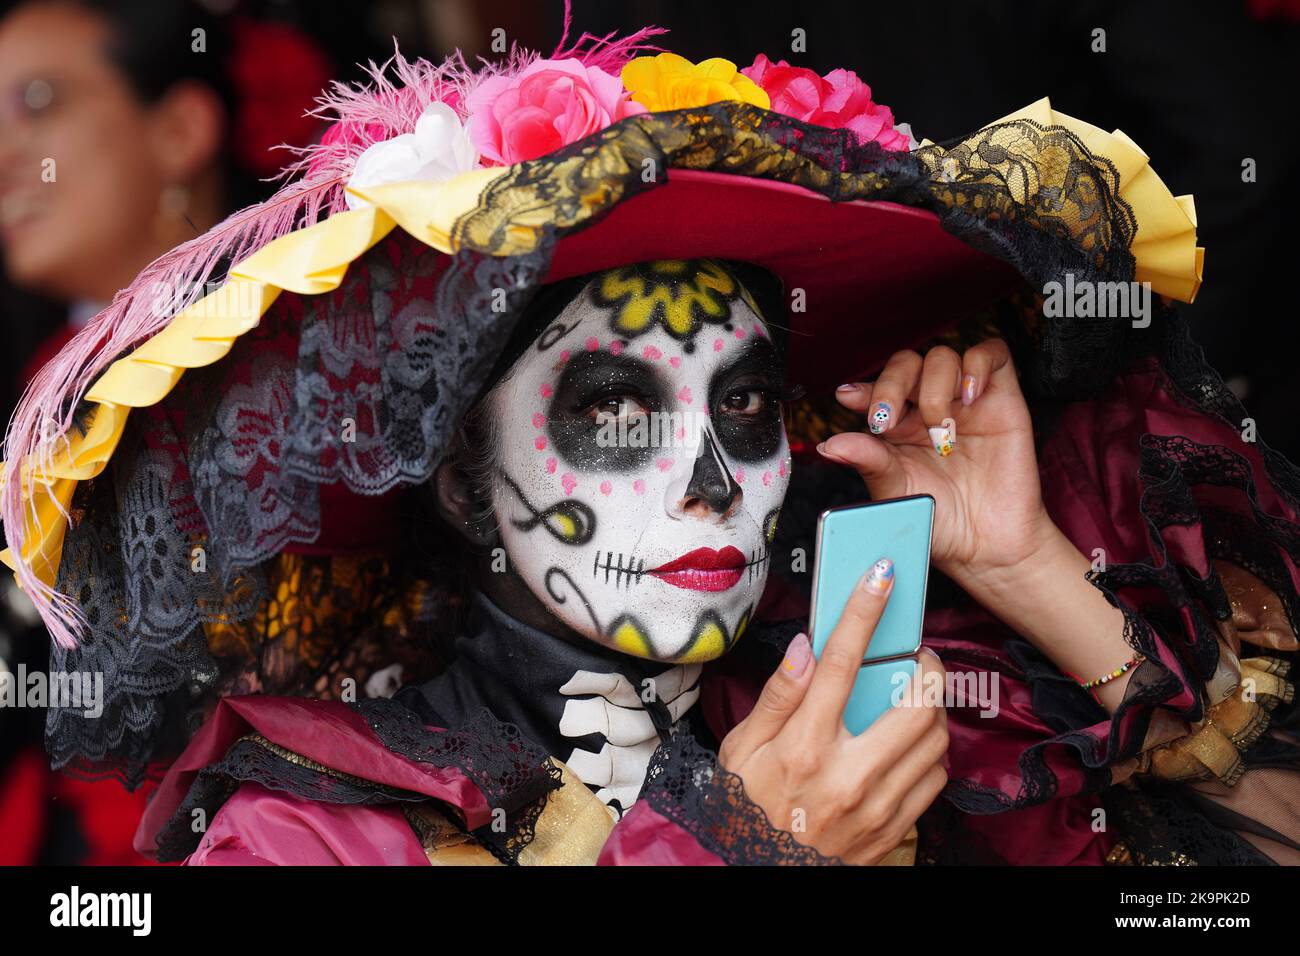 Mexico City, Mexico. 29th Oct, 2022. A woman dressed in the costume of Catrina, the skeleton bride, prepares her makeup before the start of the Grand Parade of the Dead to celebrate Dia de los Muertos holiday on Paseo de la Reforma, October 29, 2022 in Mexico City, Mexico. Credit: Richard Ellis/Richard Ellis/Alamy Live News Stock Photo